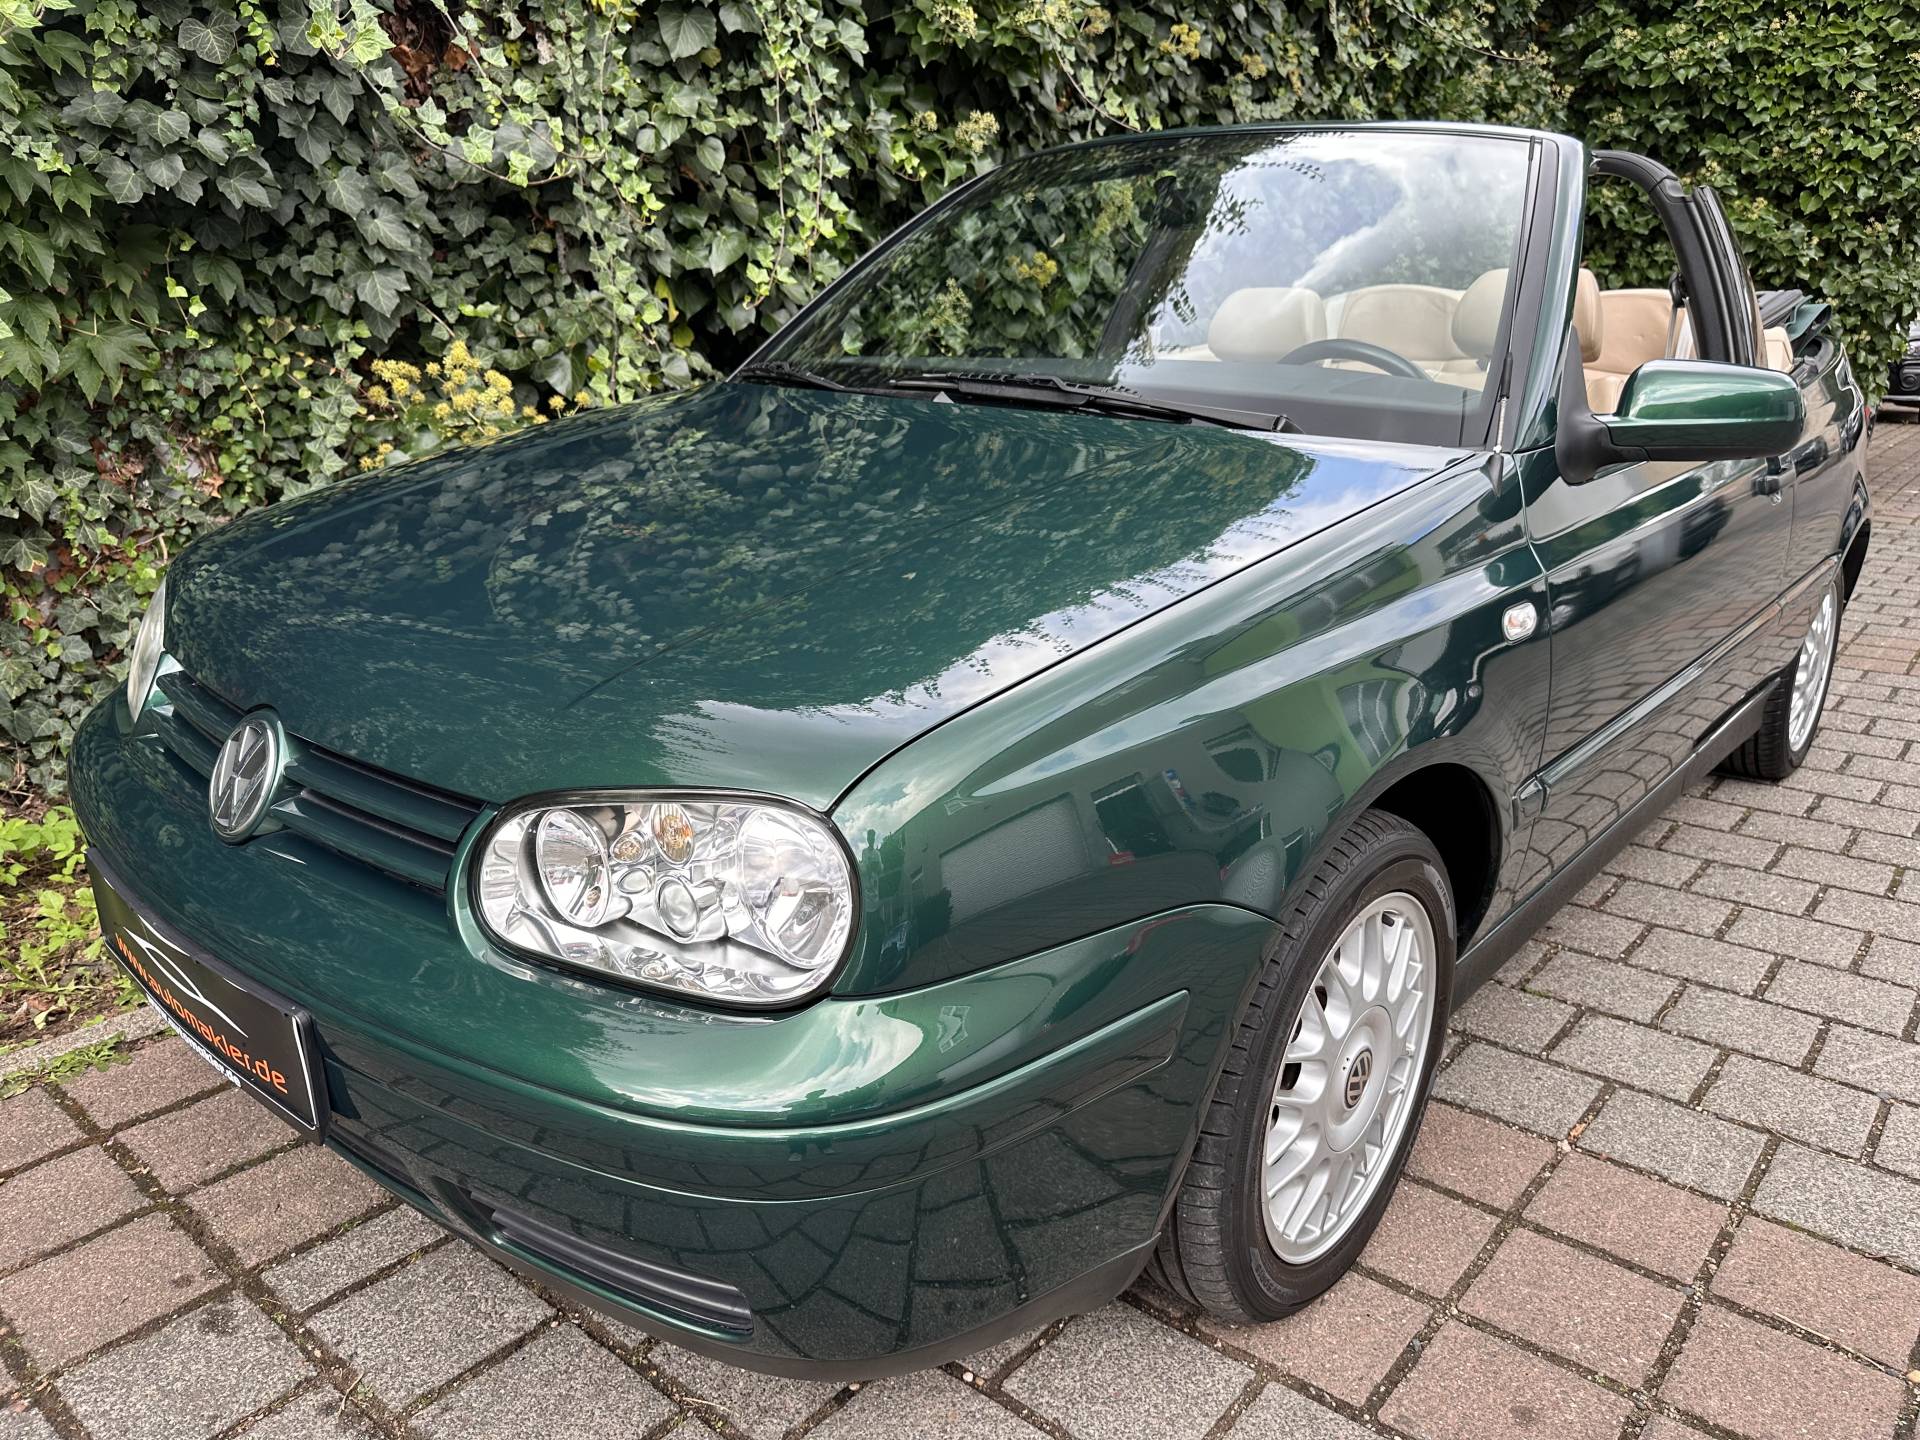 For Sale: Volkswagen Golf IV Cabrio 2.0 (2001) offered for €9,333